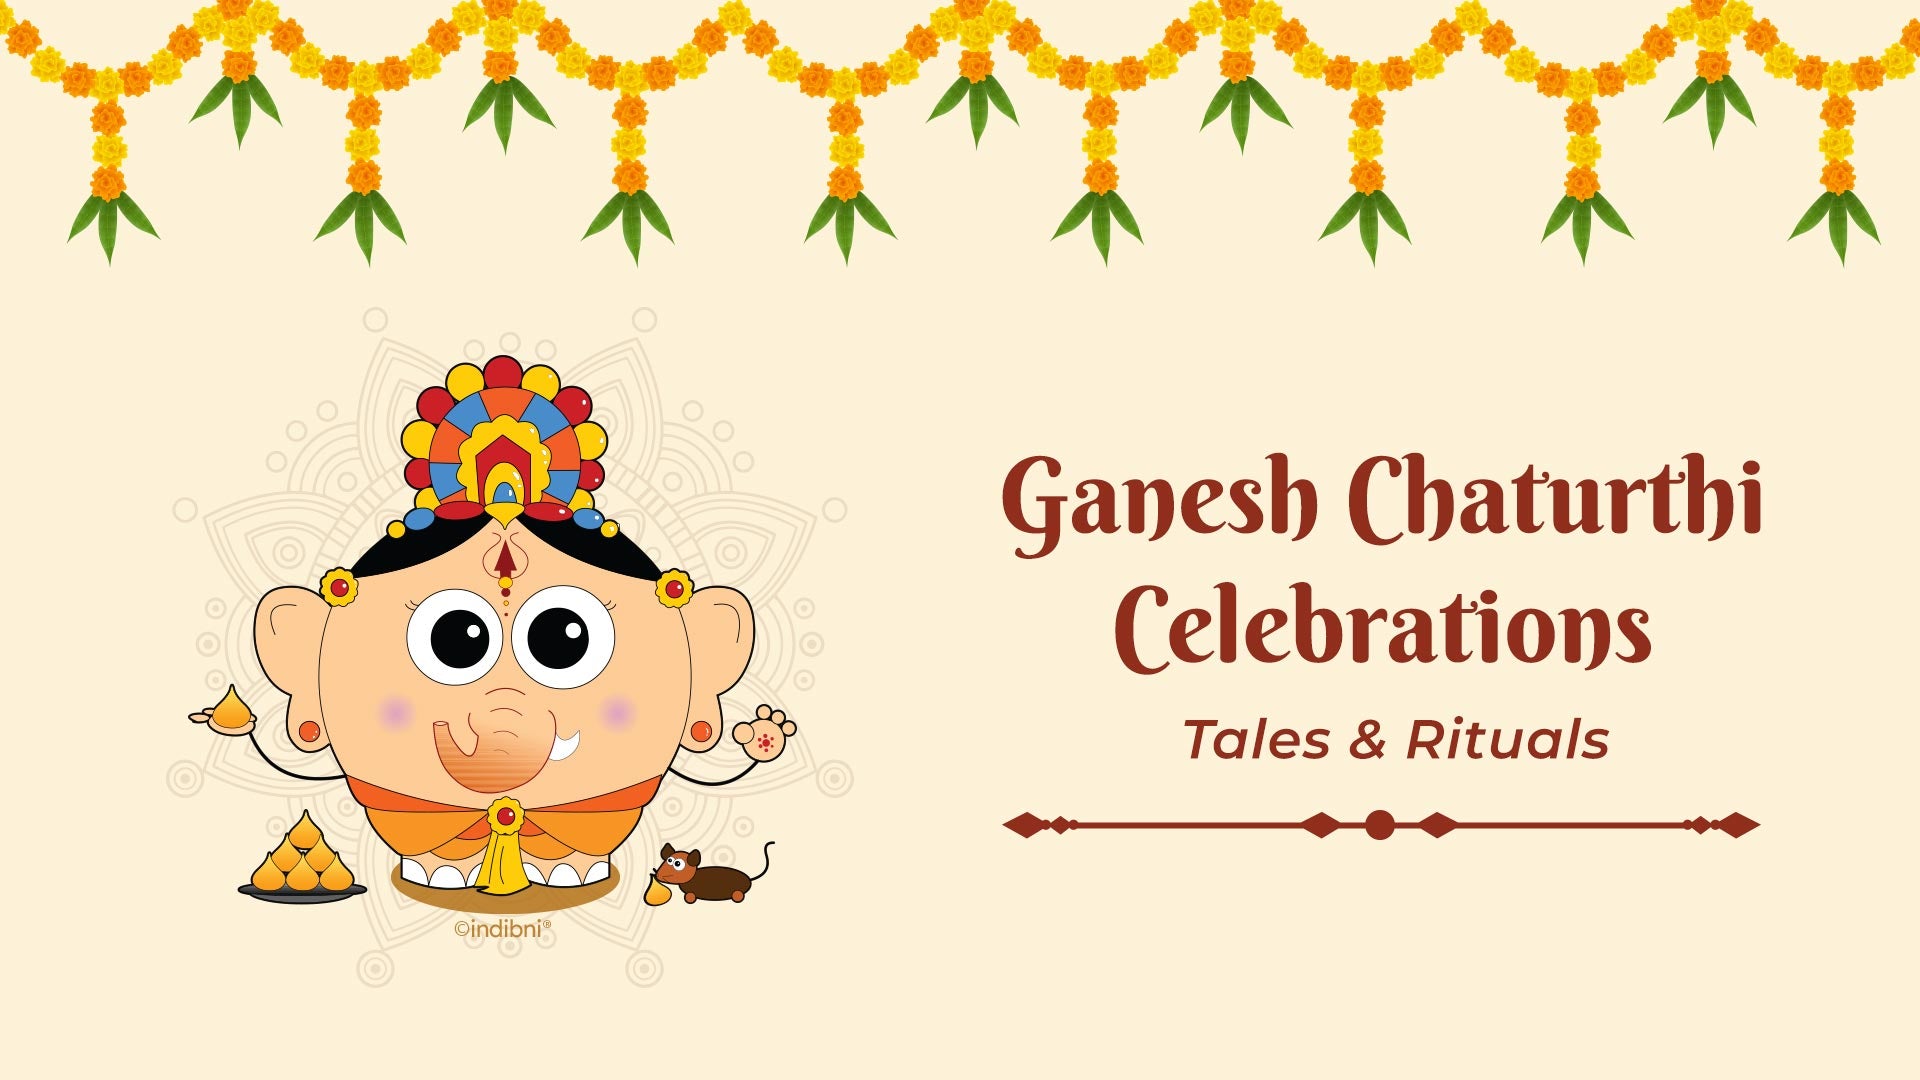 Ganesh Chaturthi Celebrations - Rituals, Culture, and Festivities